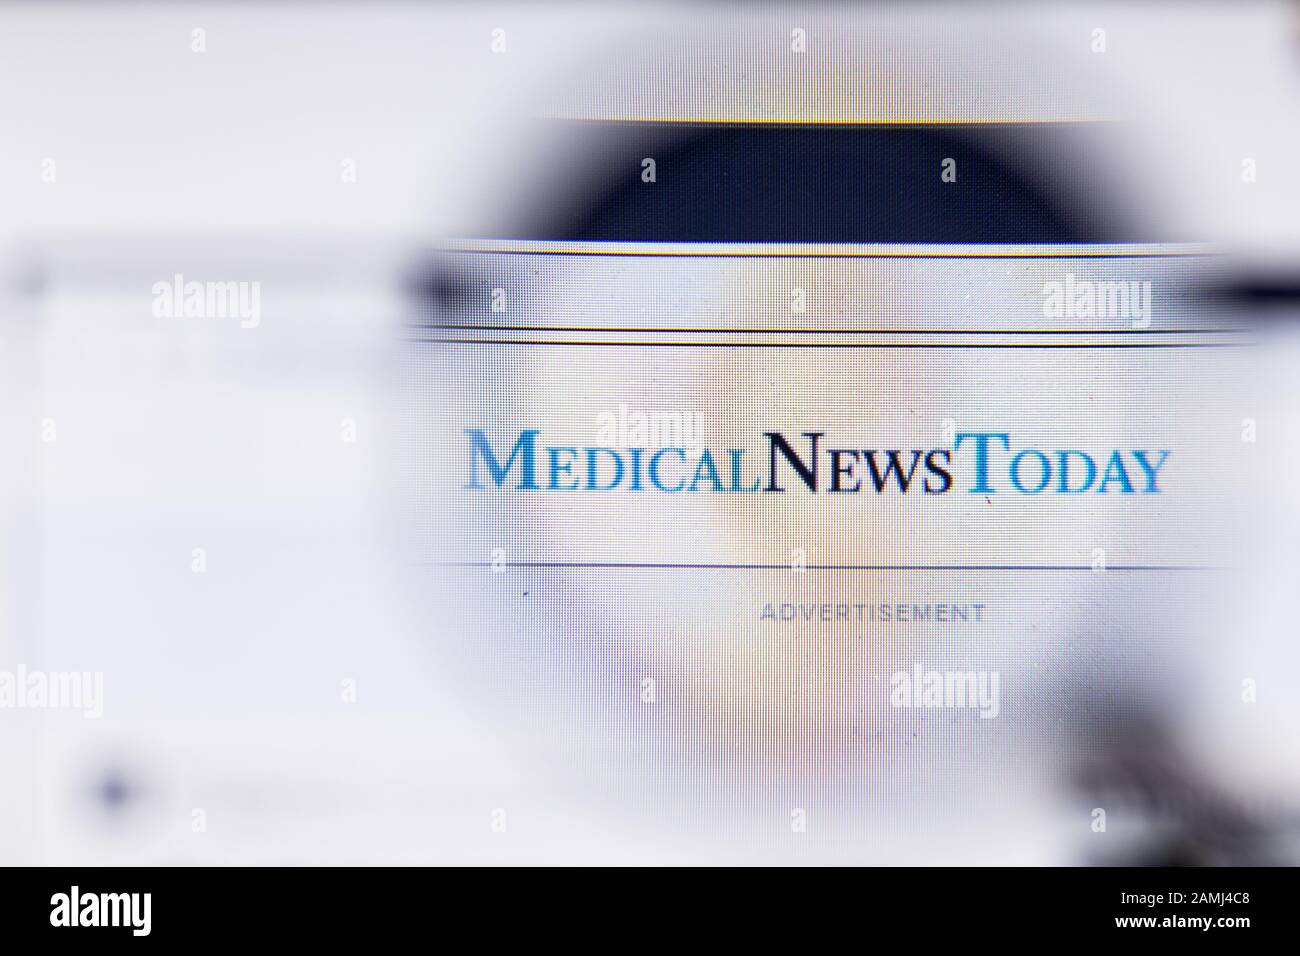 Saint-Petersburg, Russia - 10 January 2020: Medical News Today website page on laptop display with logo, Illustrative Editorial Stock Photo